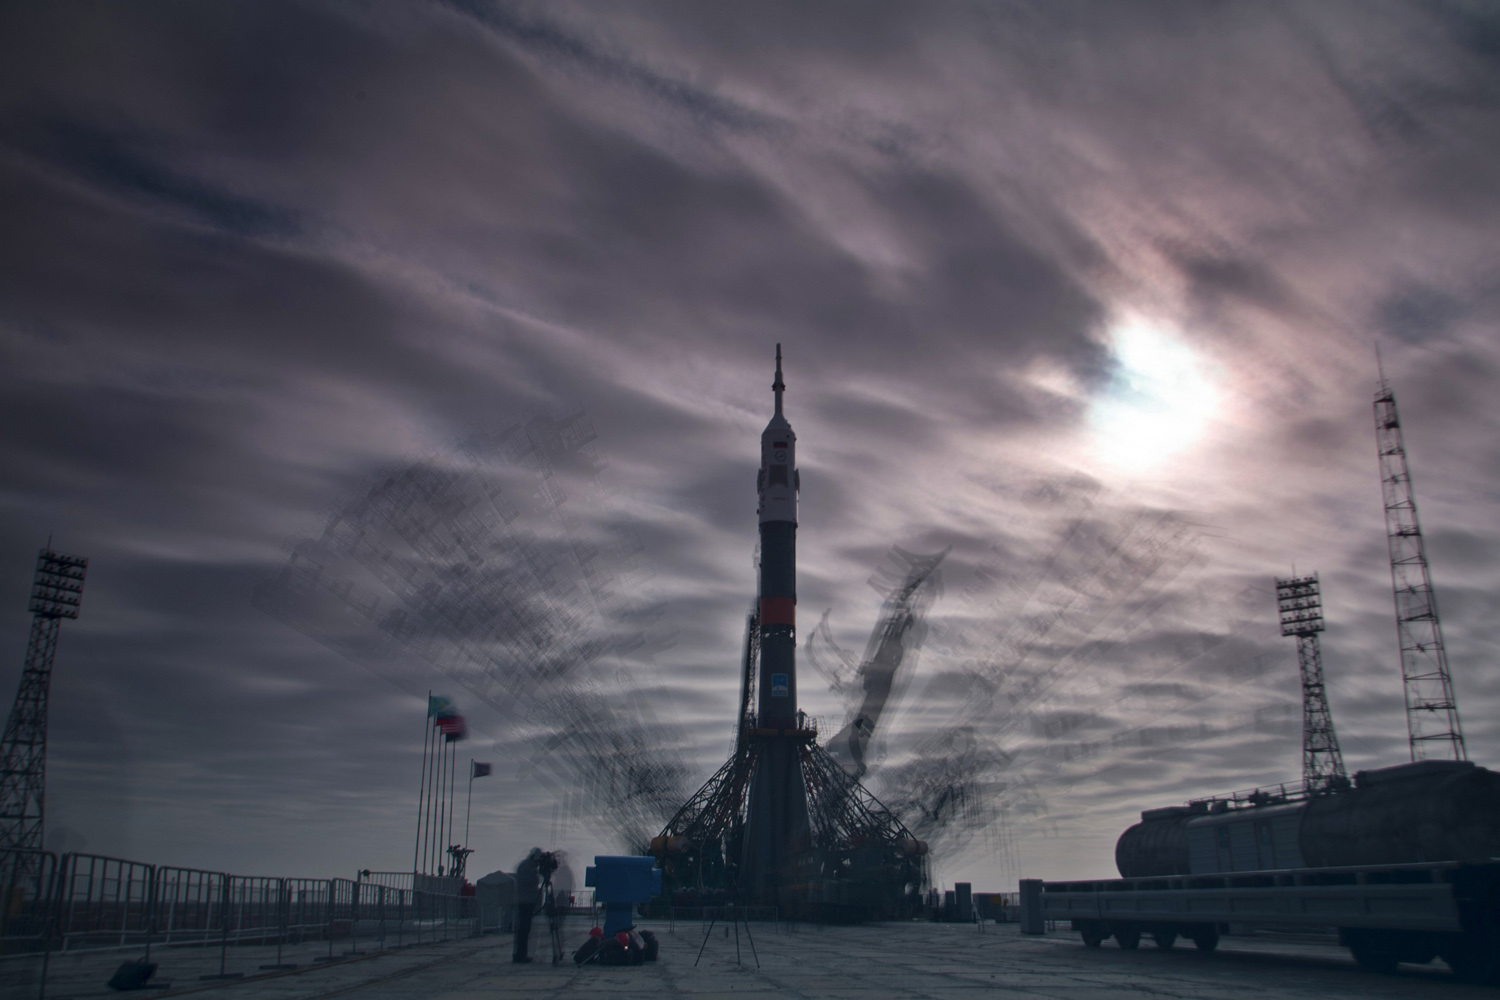 Mar. 23, 2014. The Soyuz TMA-12M spacecraft is set on its launch pad at the Baikonur cosmodrome. The spacecraft will carry Russian cosmonauts  Alexander Skvortsov and Oleg Artemyev and U.S. astronaut Steven Swanson to the International Space Station (ISS) on March 26.